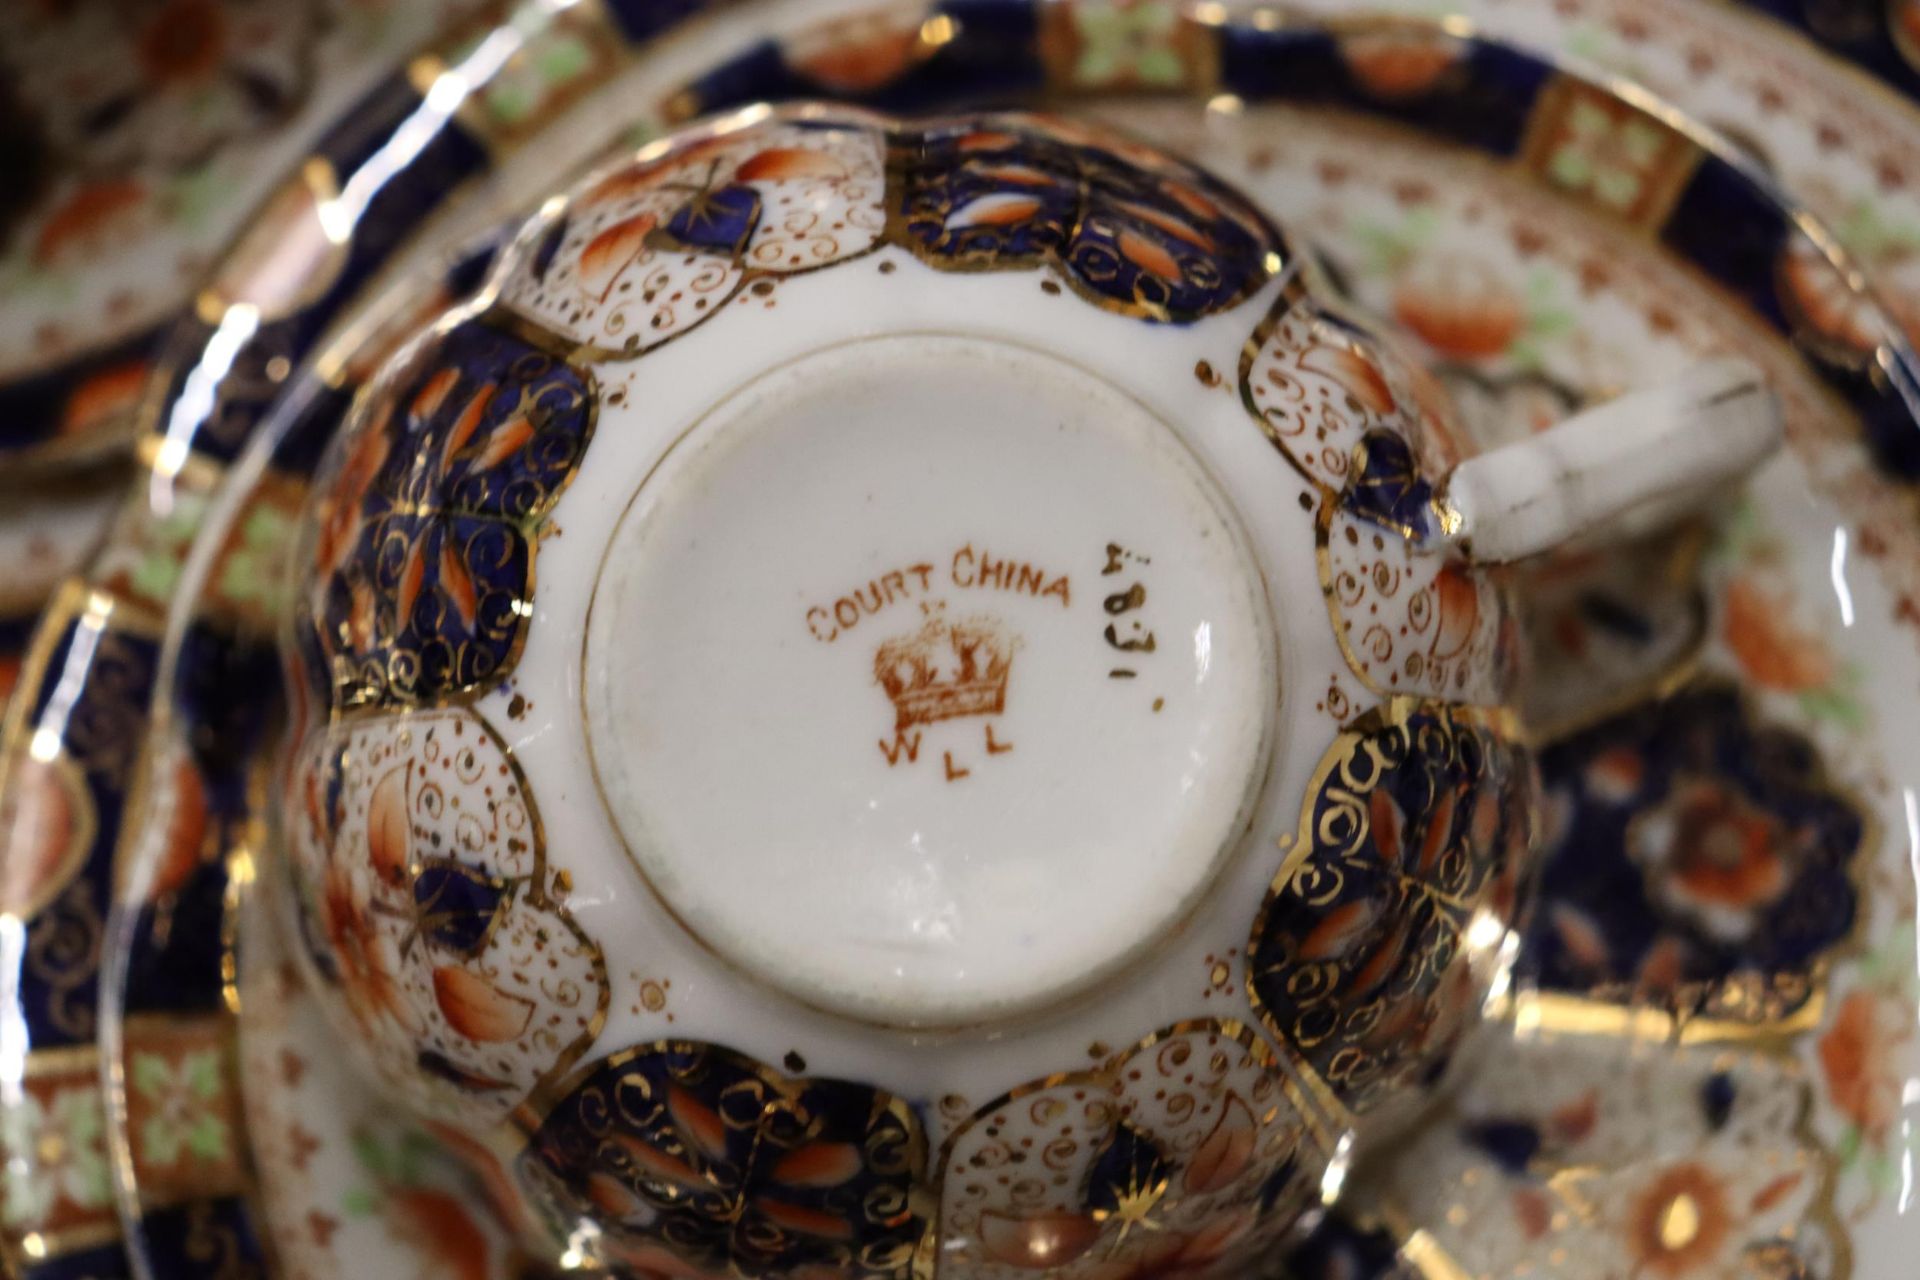 AN ANTIQUE 'COURT CHINA' TEASET TO INCLUDE CAKE PLATES, CUPS, SAUCERS, SIDE PLATES AND A SUGAR BOWL - Image 9 of 9